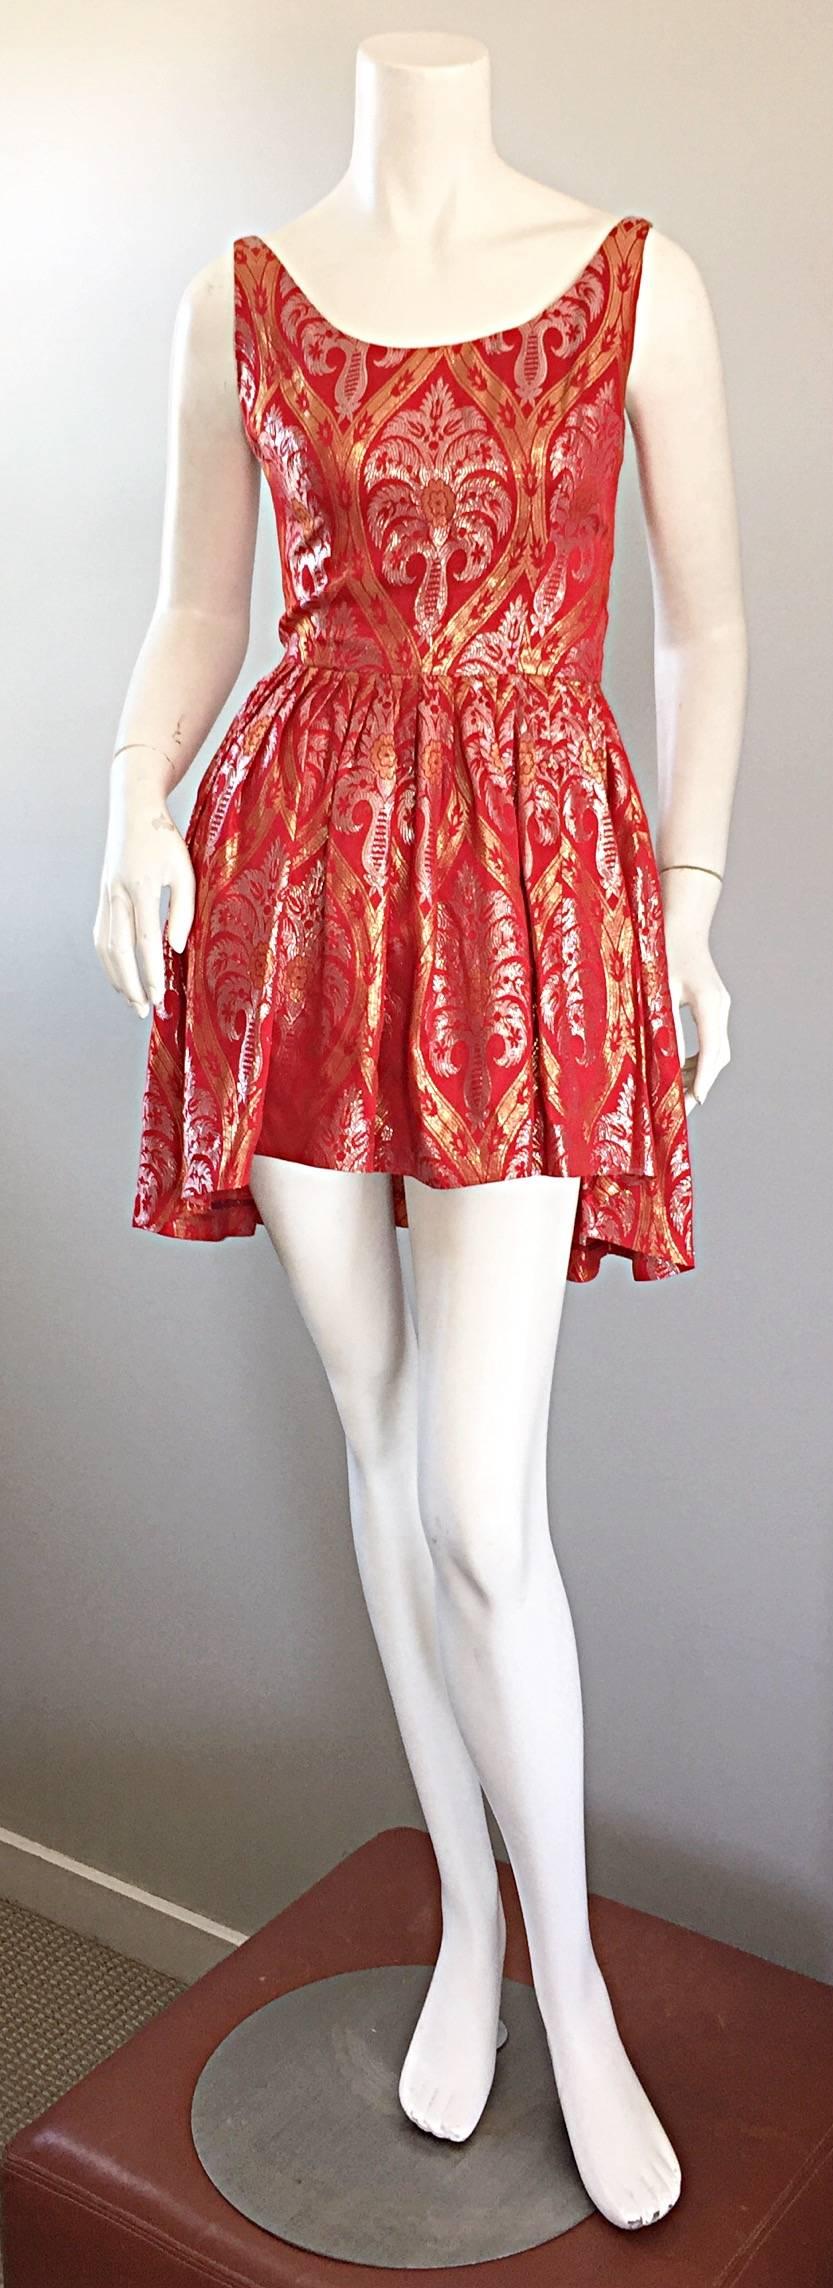 Gorgeous vintage 50s SILVANO OF ROMA FOR HEISER red silk dip hem mini dress or top! Hard to find designer is hugely sought after! Features an all-over metallic brocade pattern in gold and silver. Full skirt that is longer in the back. Flattering